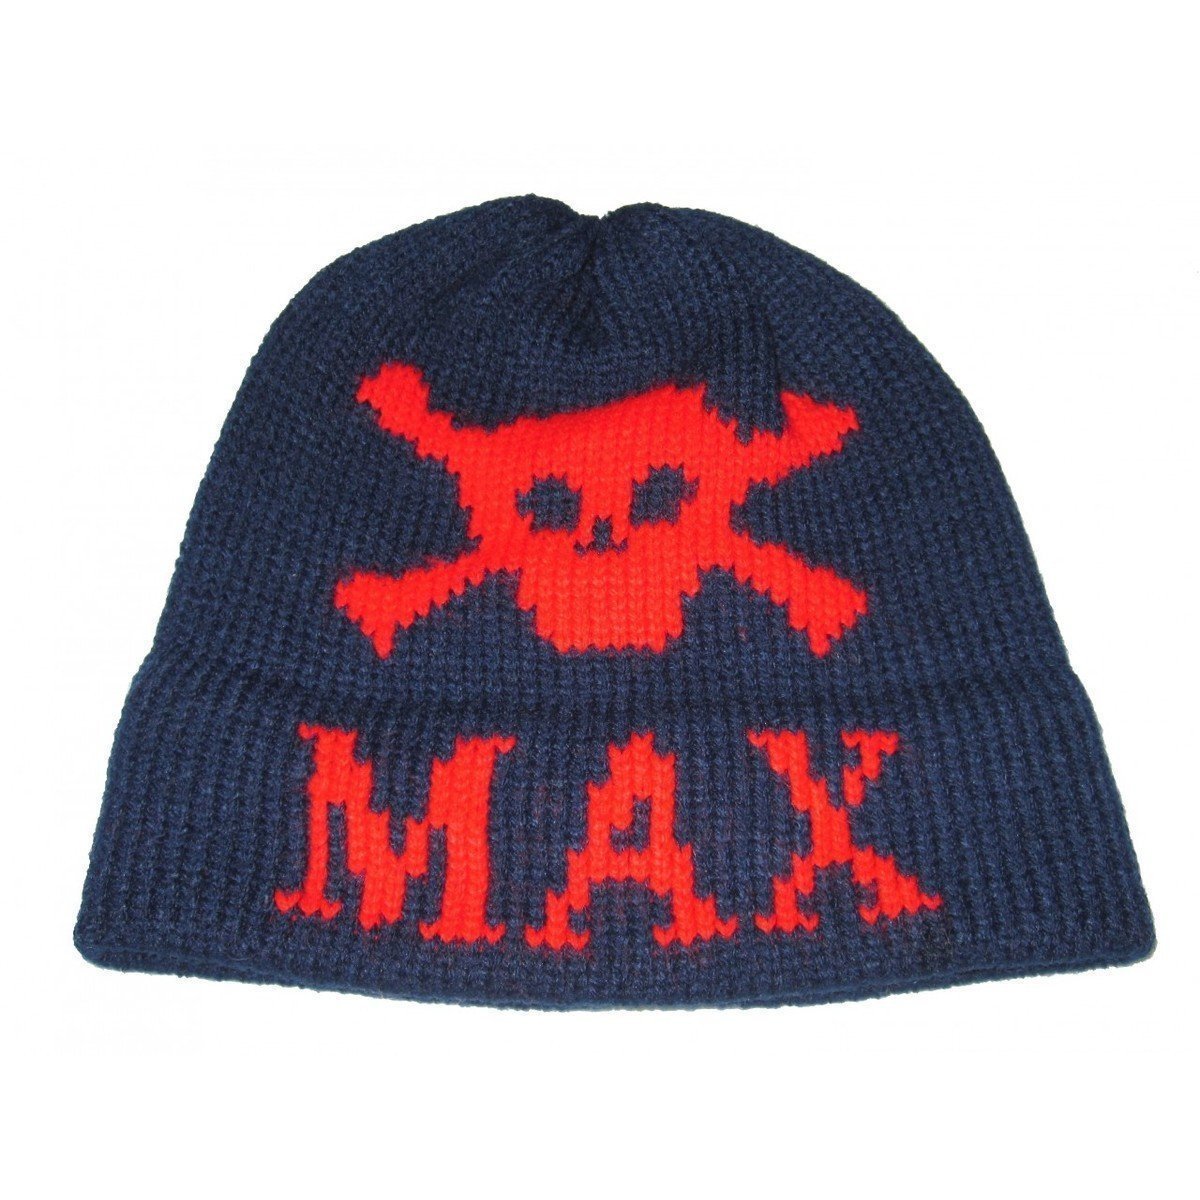 Skull Crossbones Personalized Knit Hat-Hats-Jack and Jill Boutique